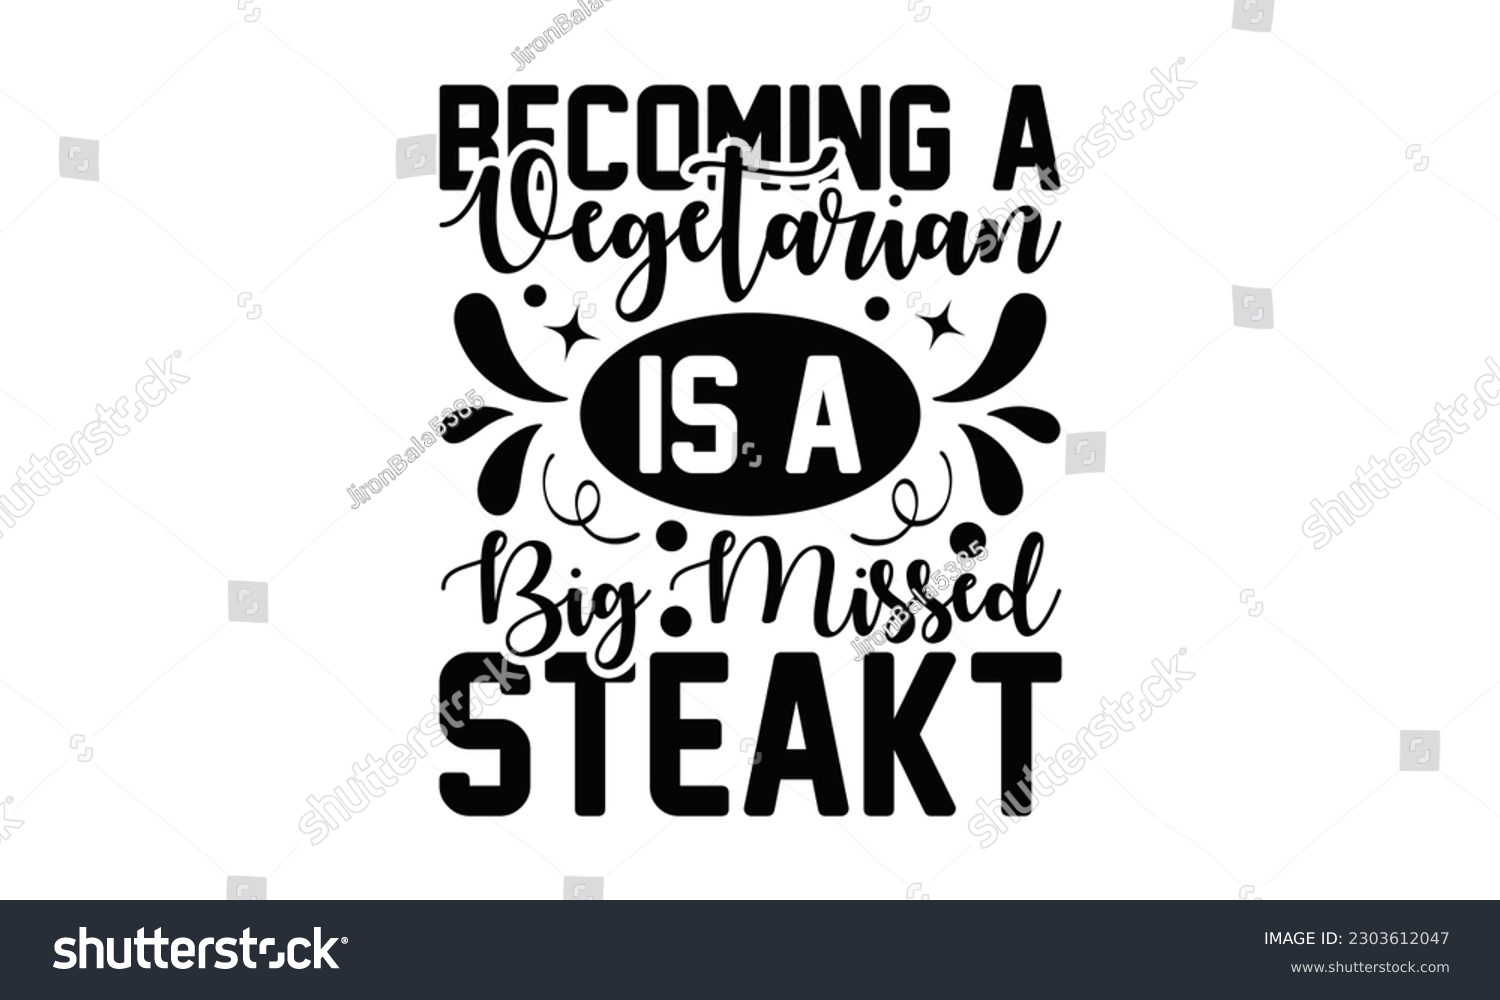 SVG of Becoming A Vegetarian Is A Big Missed Steak - Barbecue SVG Design, Hand drawn vintage illustration with hand-lettering and decoration element, for prints on t-shirts, bags and Mug.
 svg